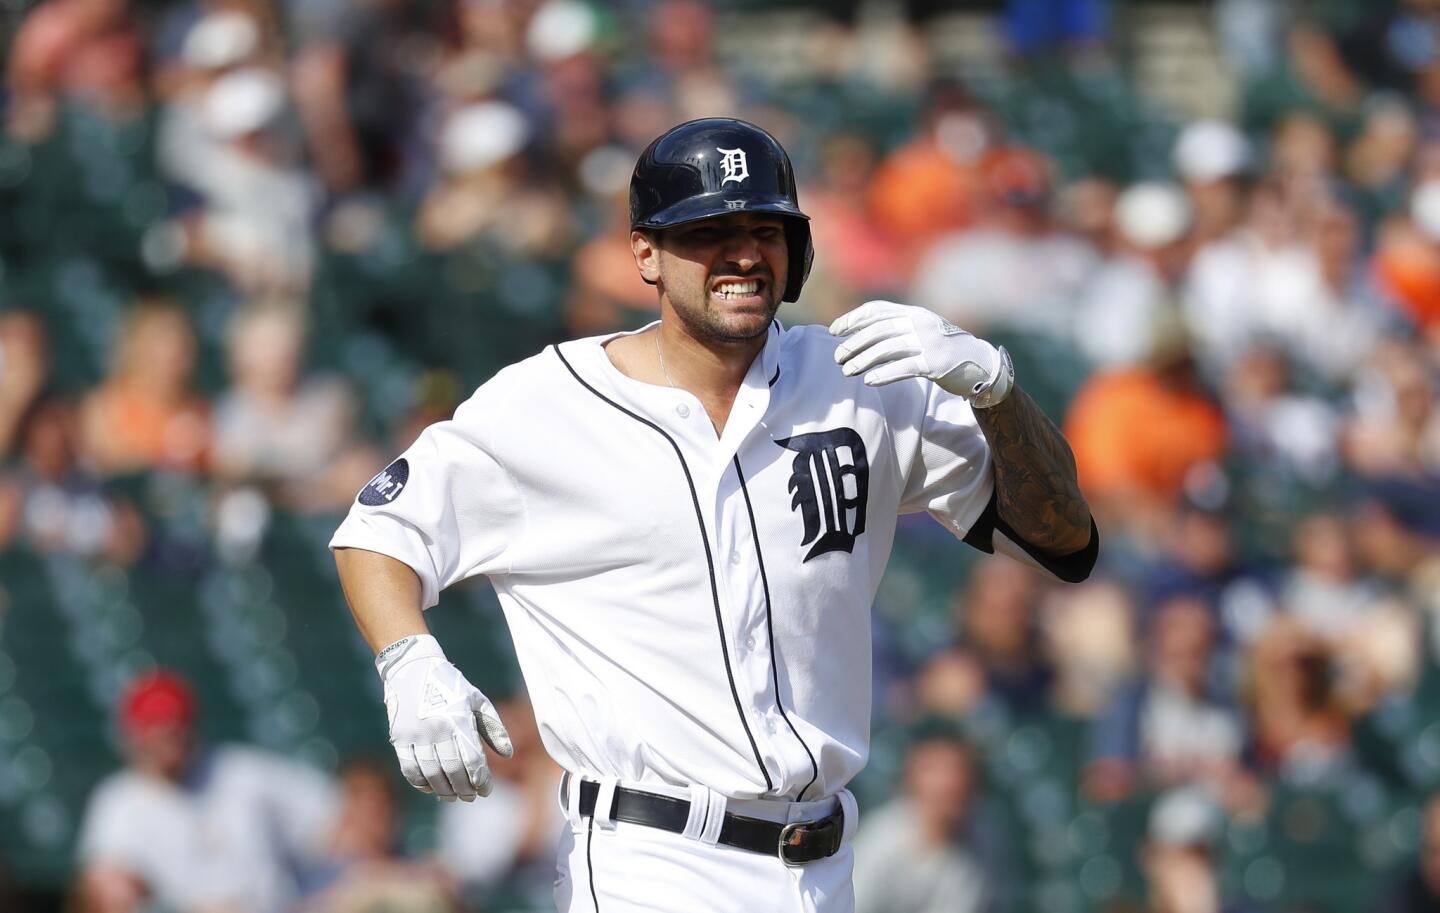 Tigers 7, White Sox 4